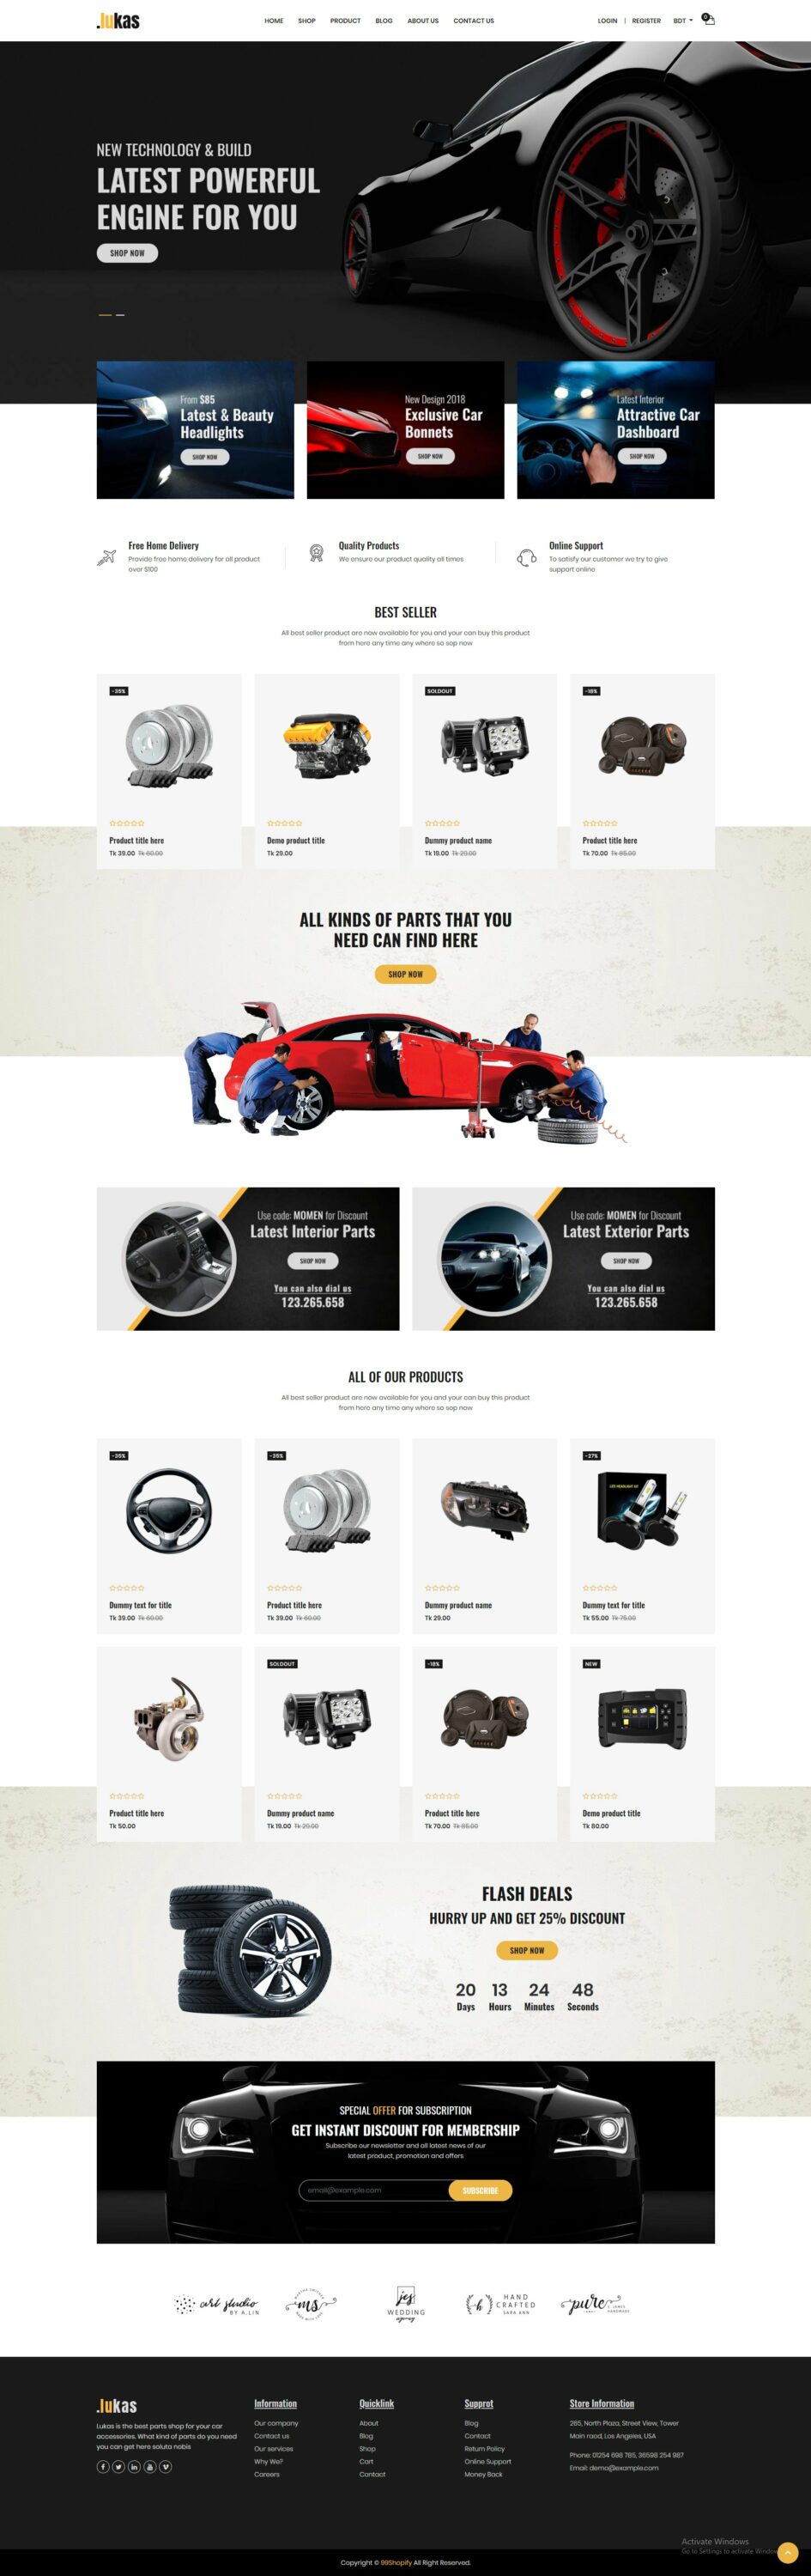 Cover image of Car Parts Store Shopify Theme.